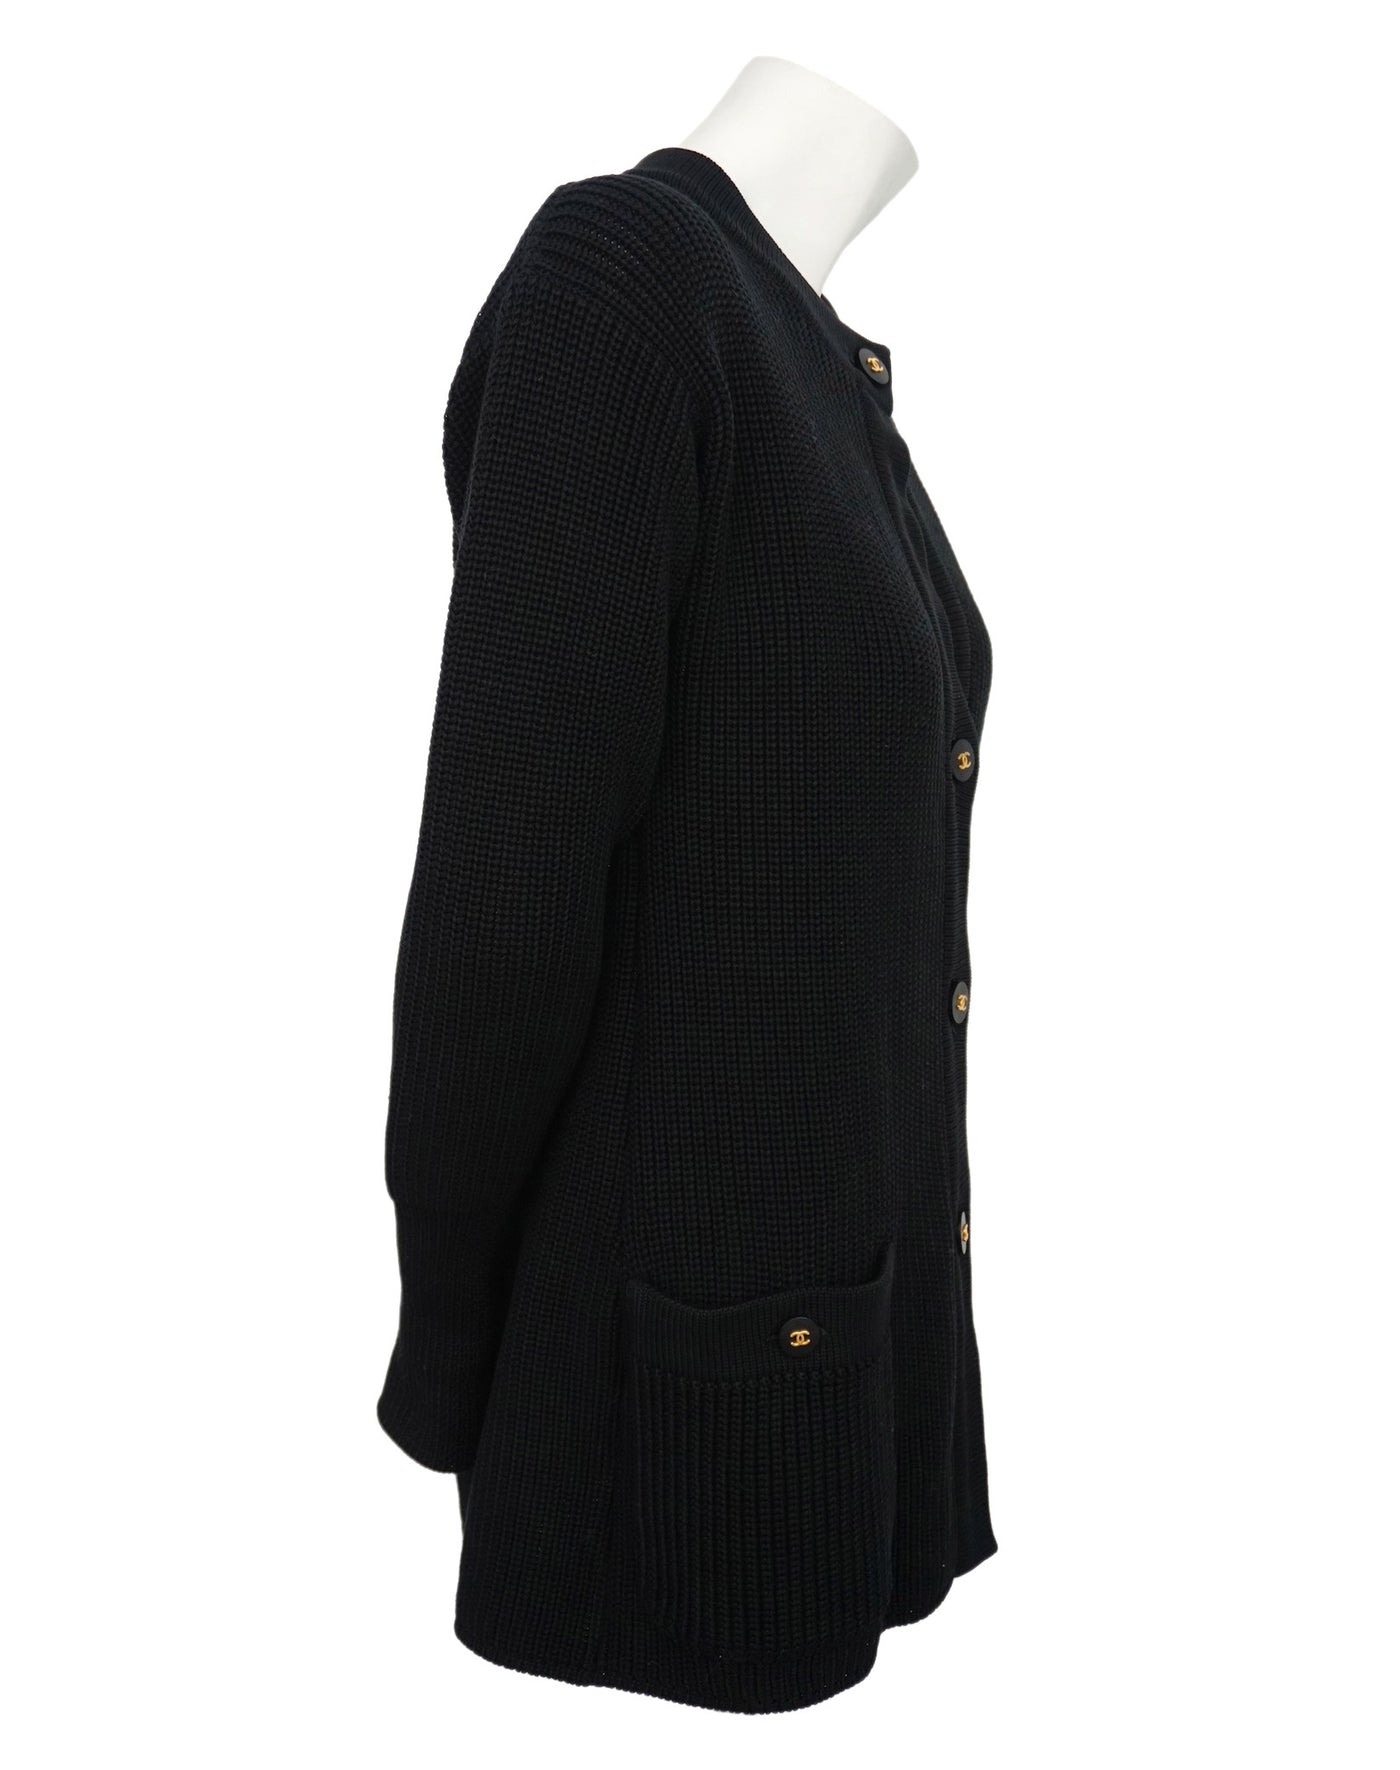 Authentic Chanel Classic Black Wool Blend Cardigan Sweater Jacket Size 36